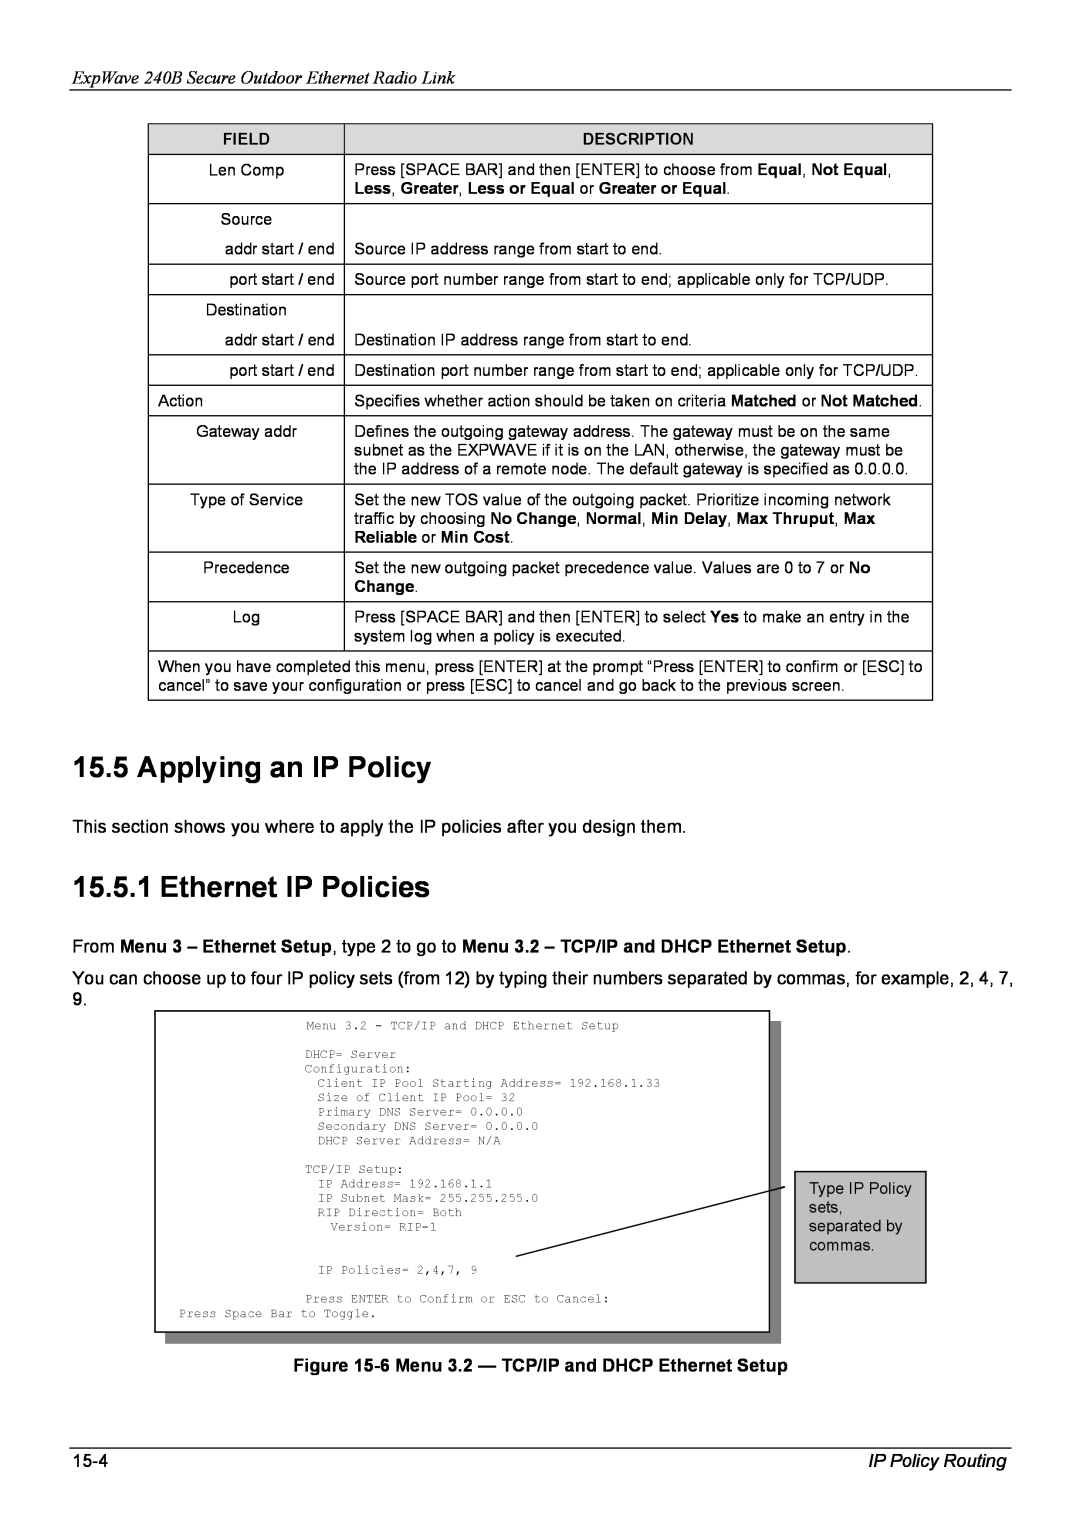 ZyXEL Communications manual Applying an IP Policy, Ethernet IP Policies, ExpWave 240B Secure Outdoor Ethernet Radio Link 